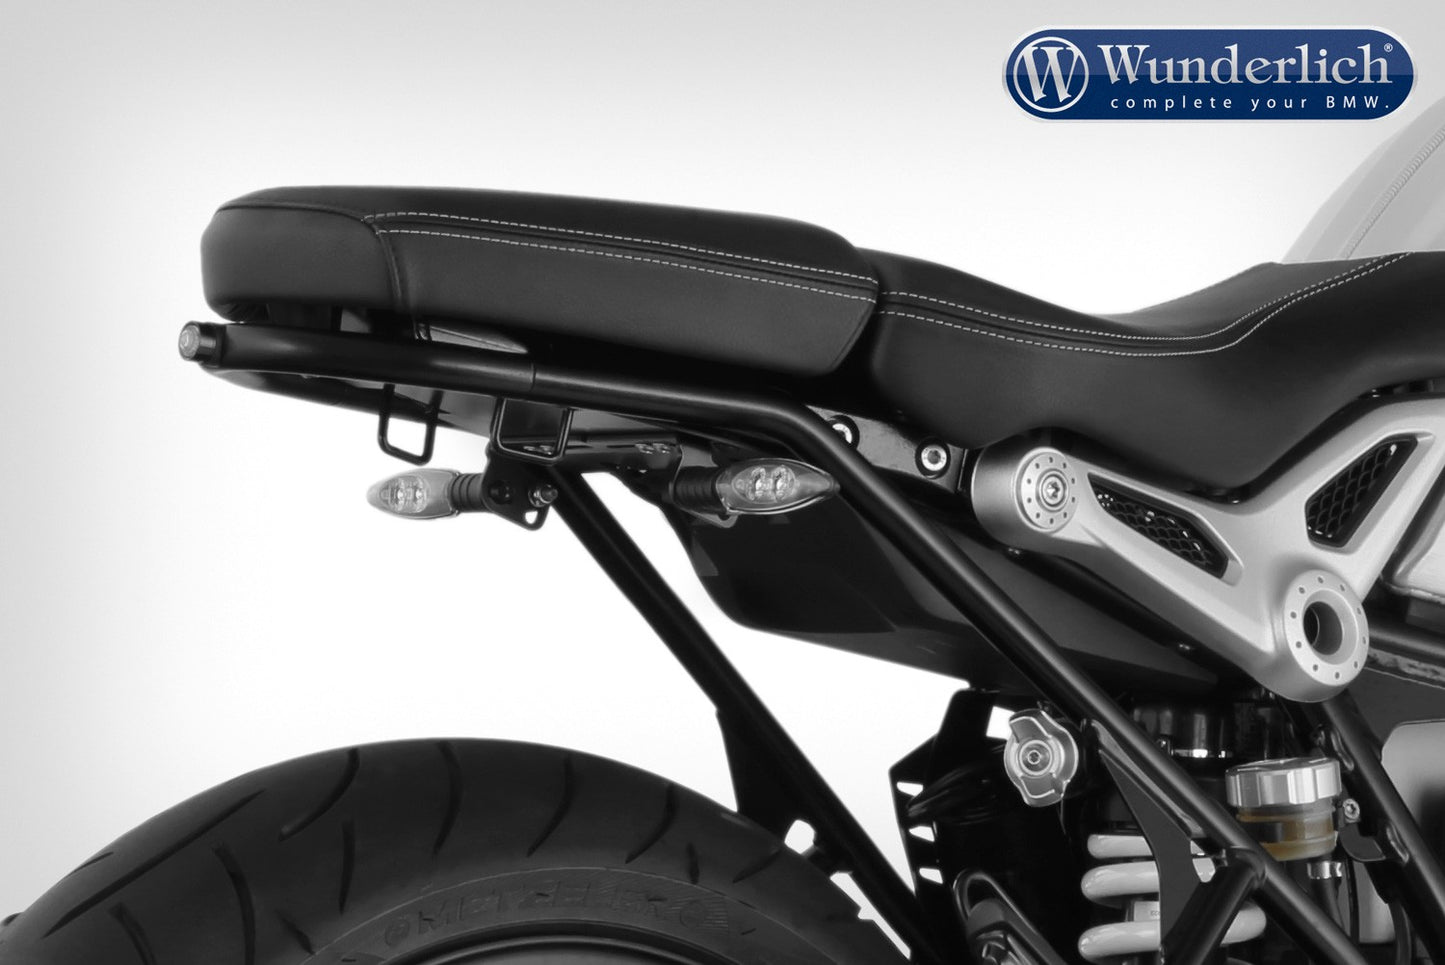 Tail section R nineT with tail light - incl. taillight - black